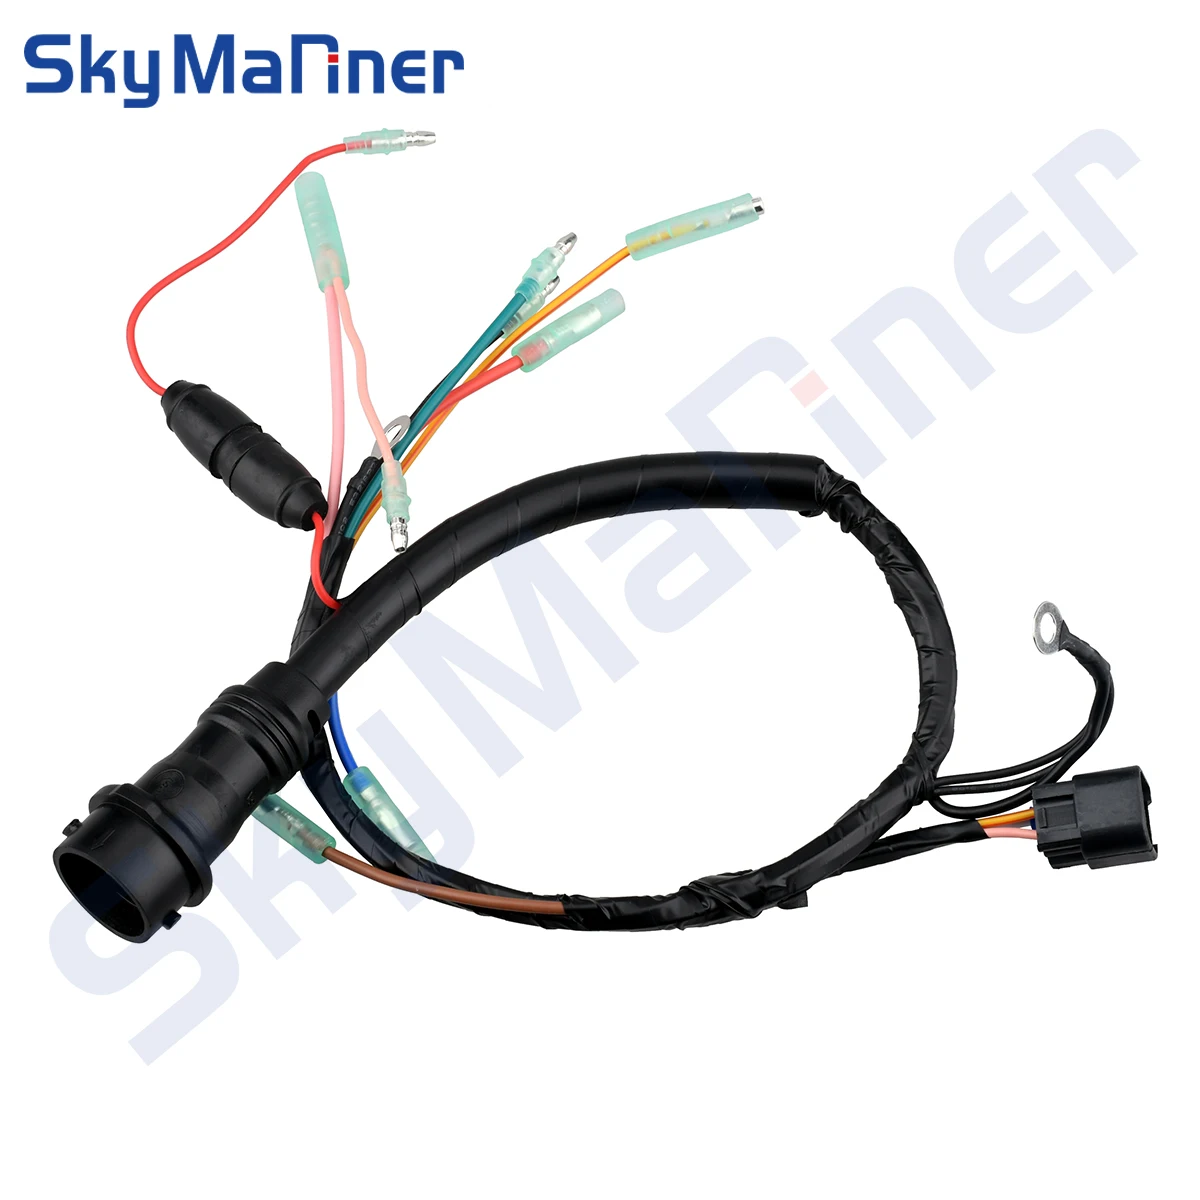 688-82590-04 Wire Harness Assy (7P) for yamaha outboard 2T 75HP 85HP 688-82590-04-00 688-82590 boat engine parts